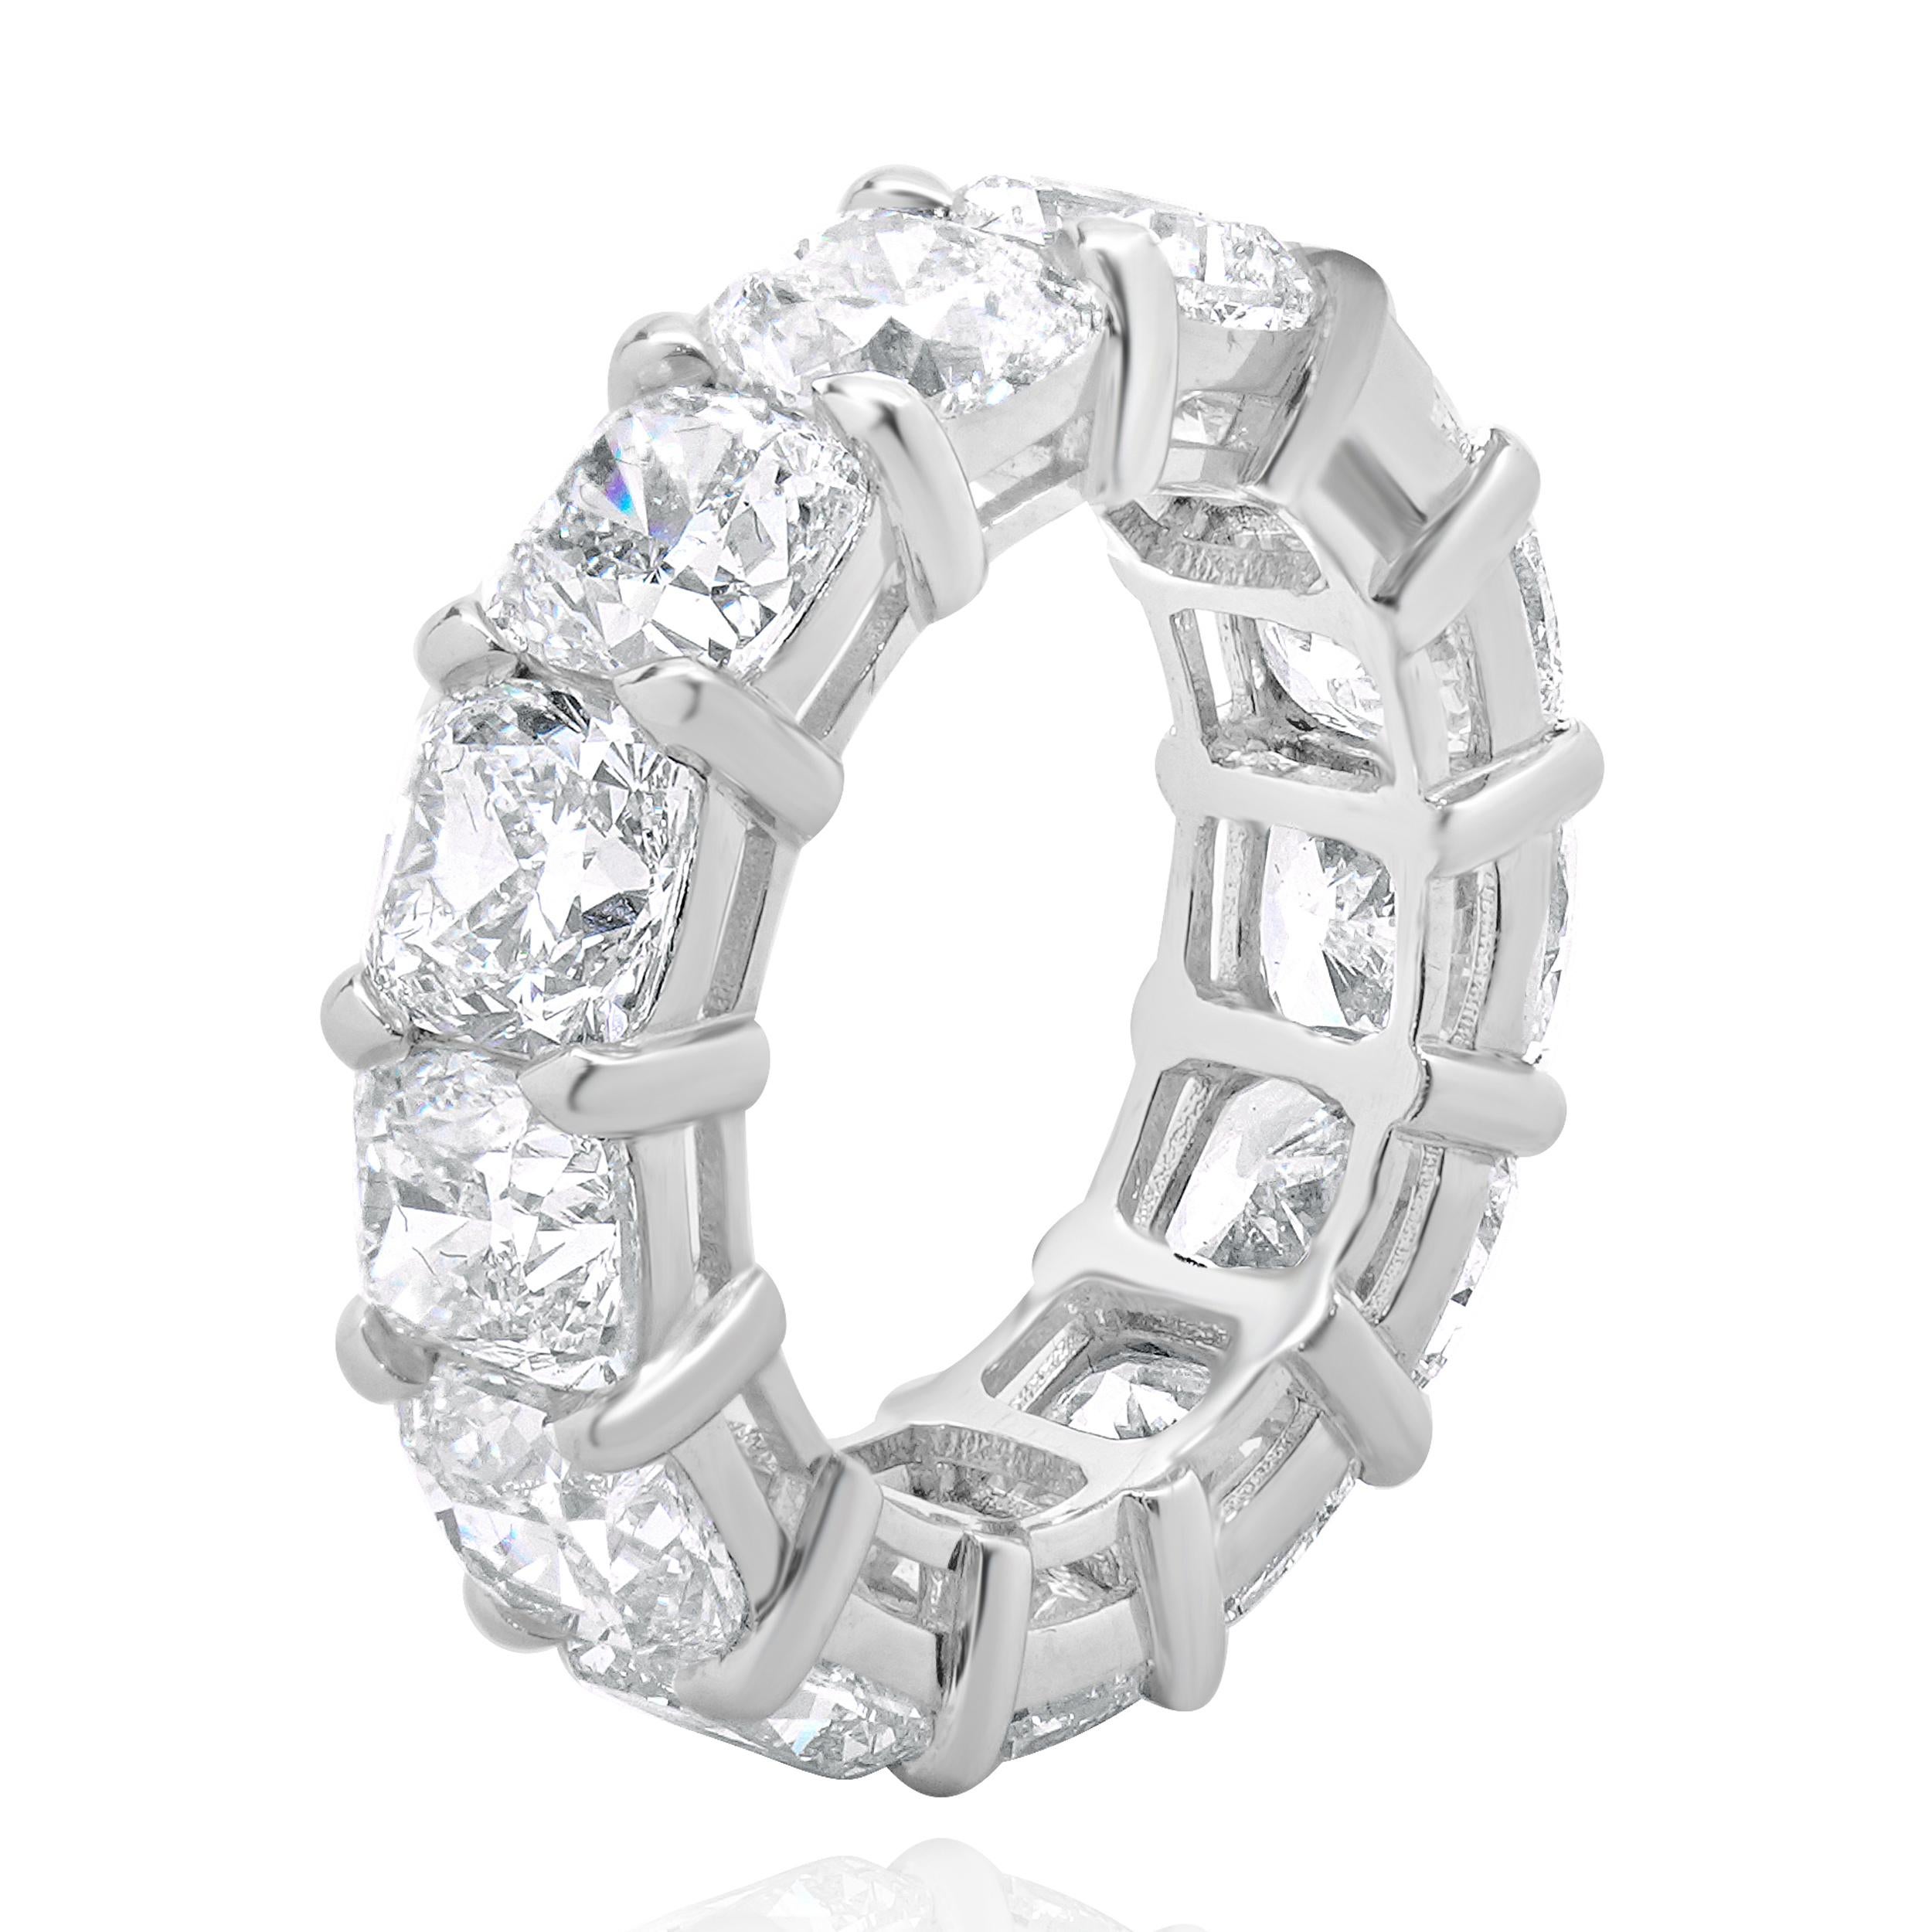 Designer: custom
Material: platinum
Diamond:  13 cushion cut = 16.21cttw
Color: F-G
Clarity: VVS1-VS2
Ring size: 7 (please allow two additional shipping days for sizing requests)
Weight: 12.12 grams